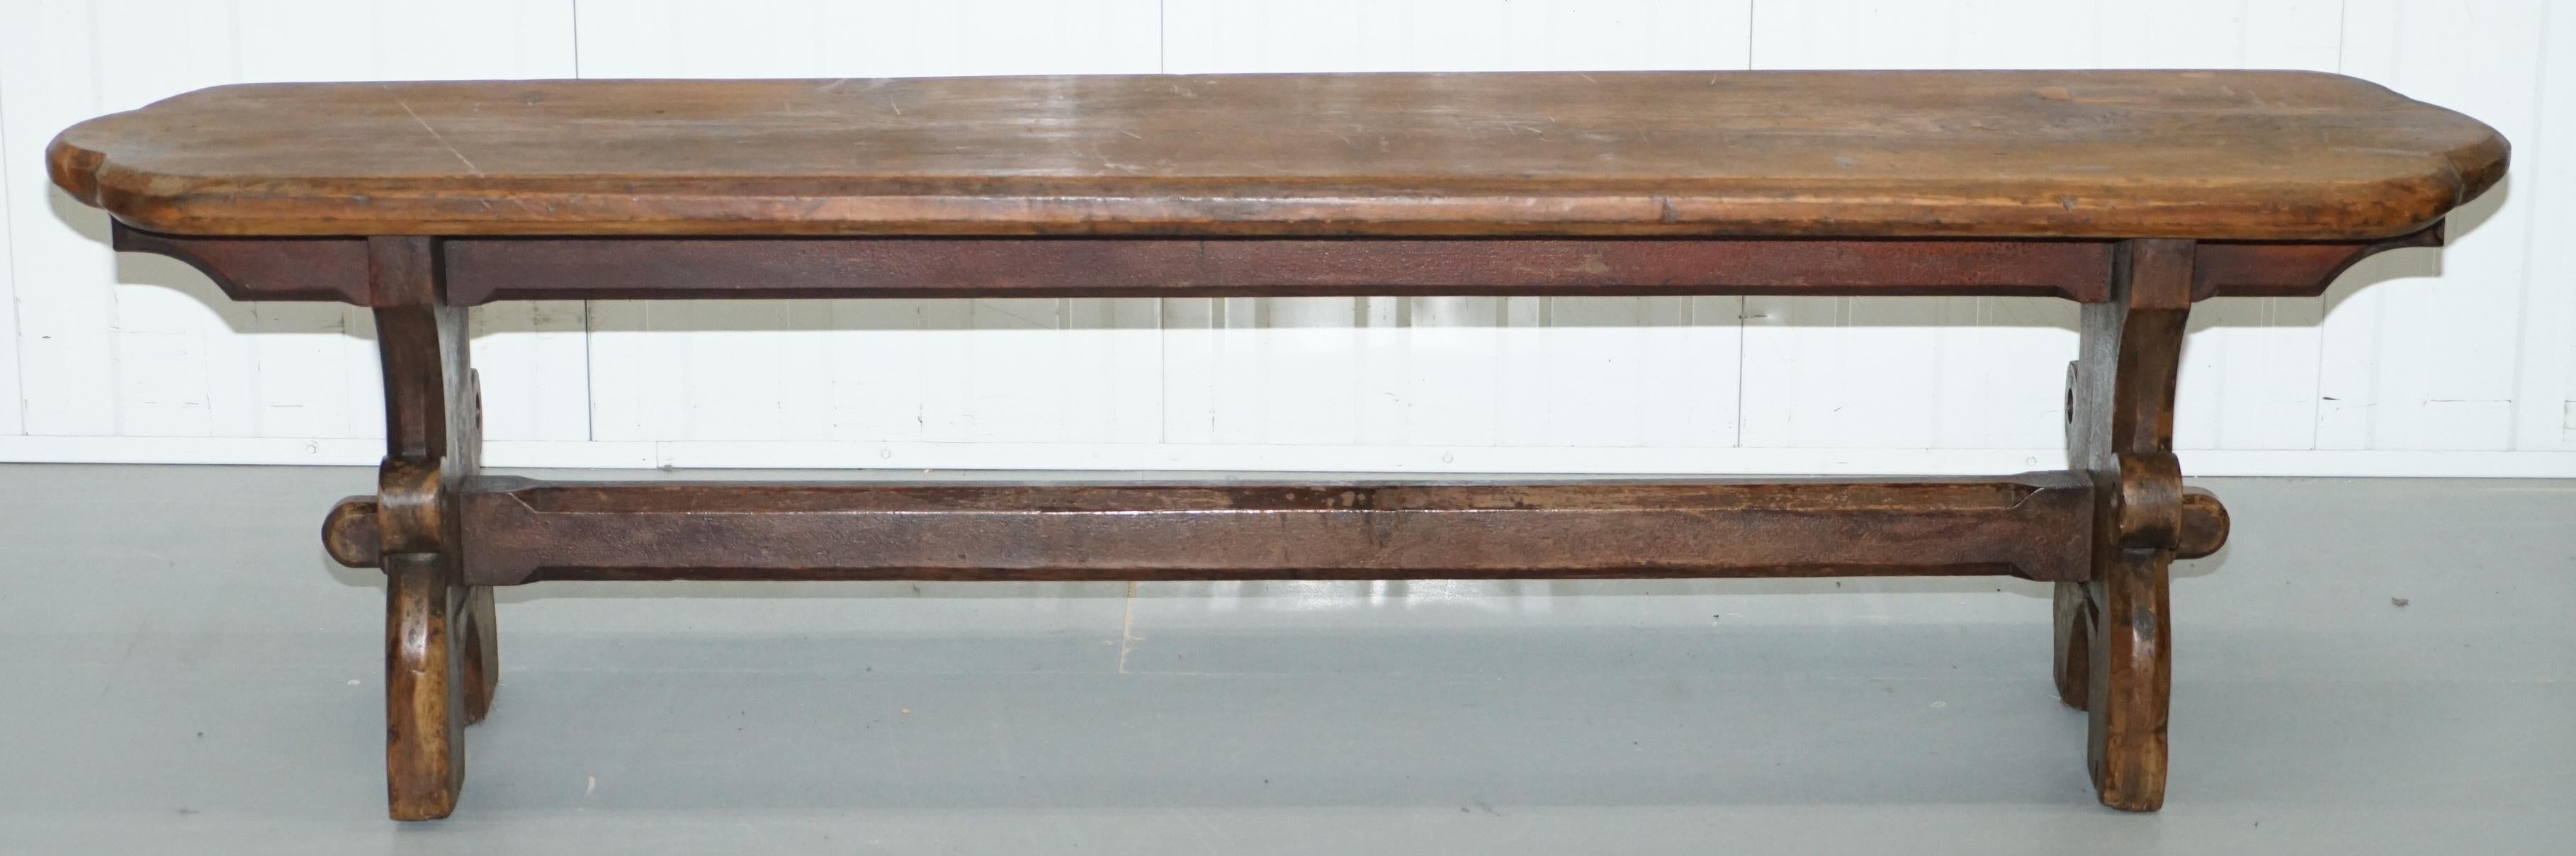 We are delighted to offer for sale this stunning original Pitch pine 19th century Victorian dining table bench 

A very well made heavy bench, it was being used with an early Victoria farmhouse country dining table, this sat on one side and the